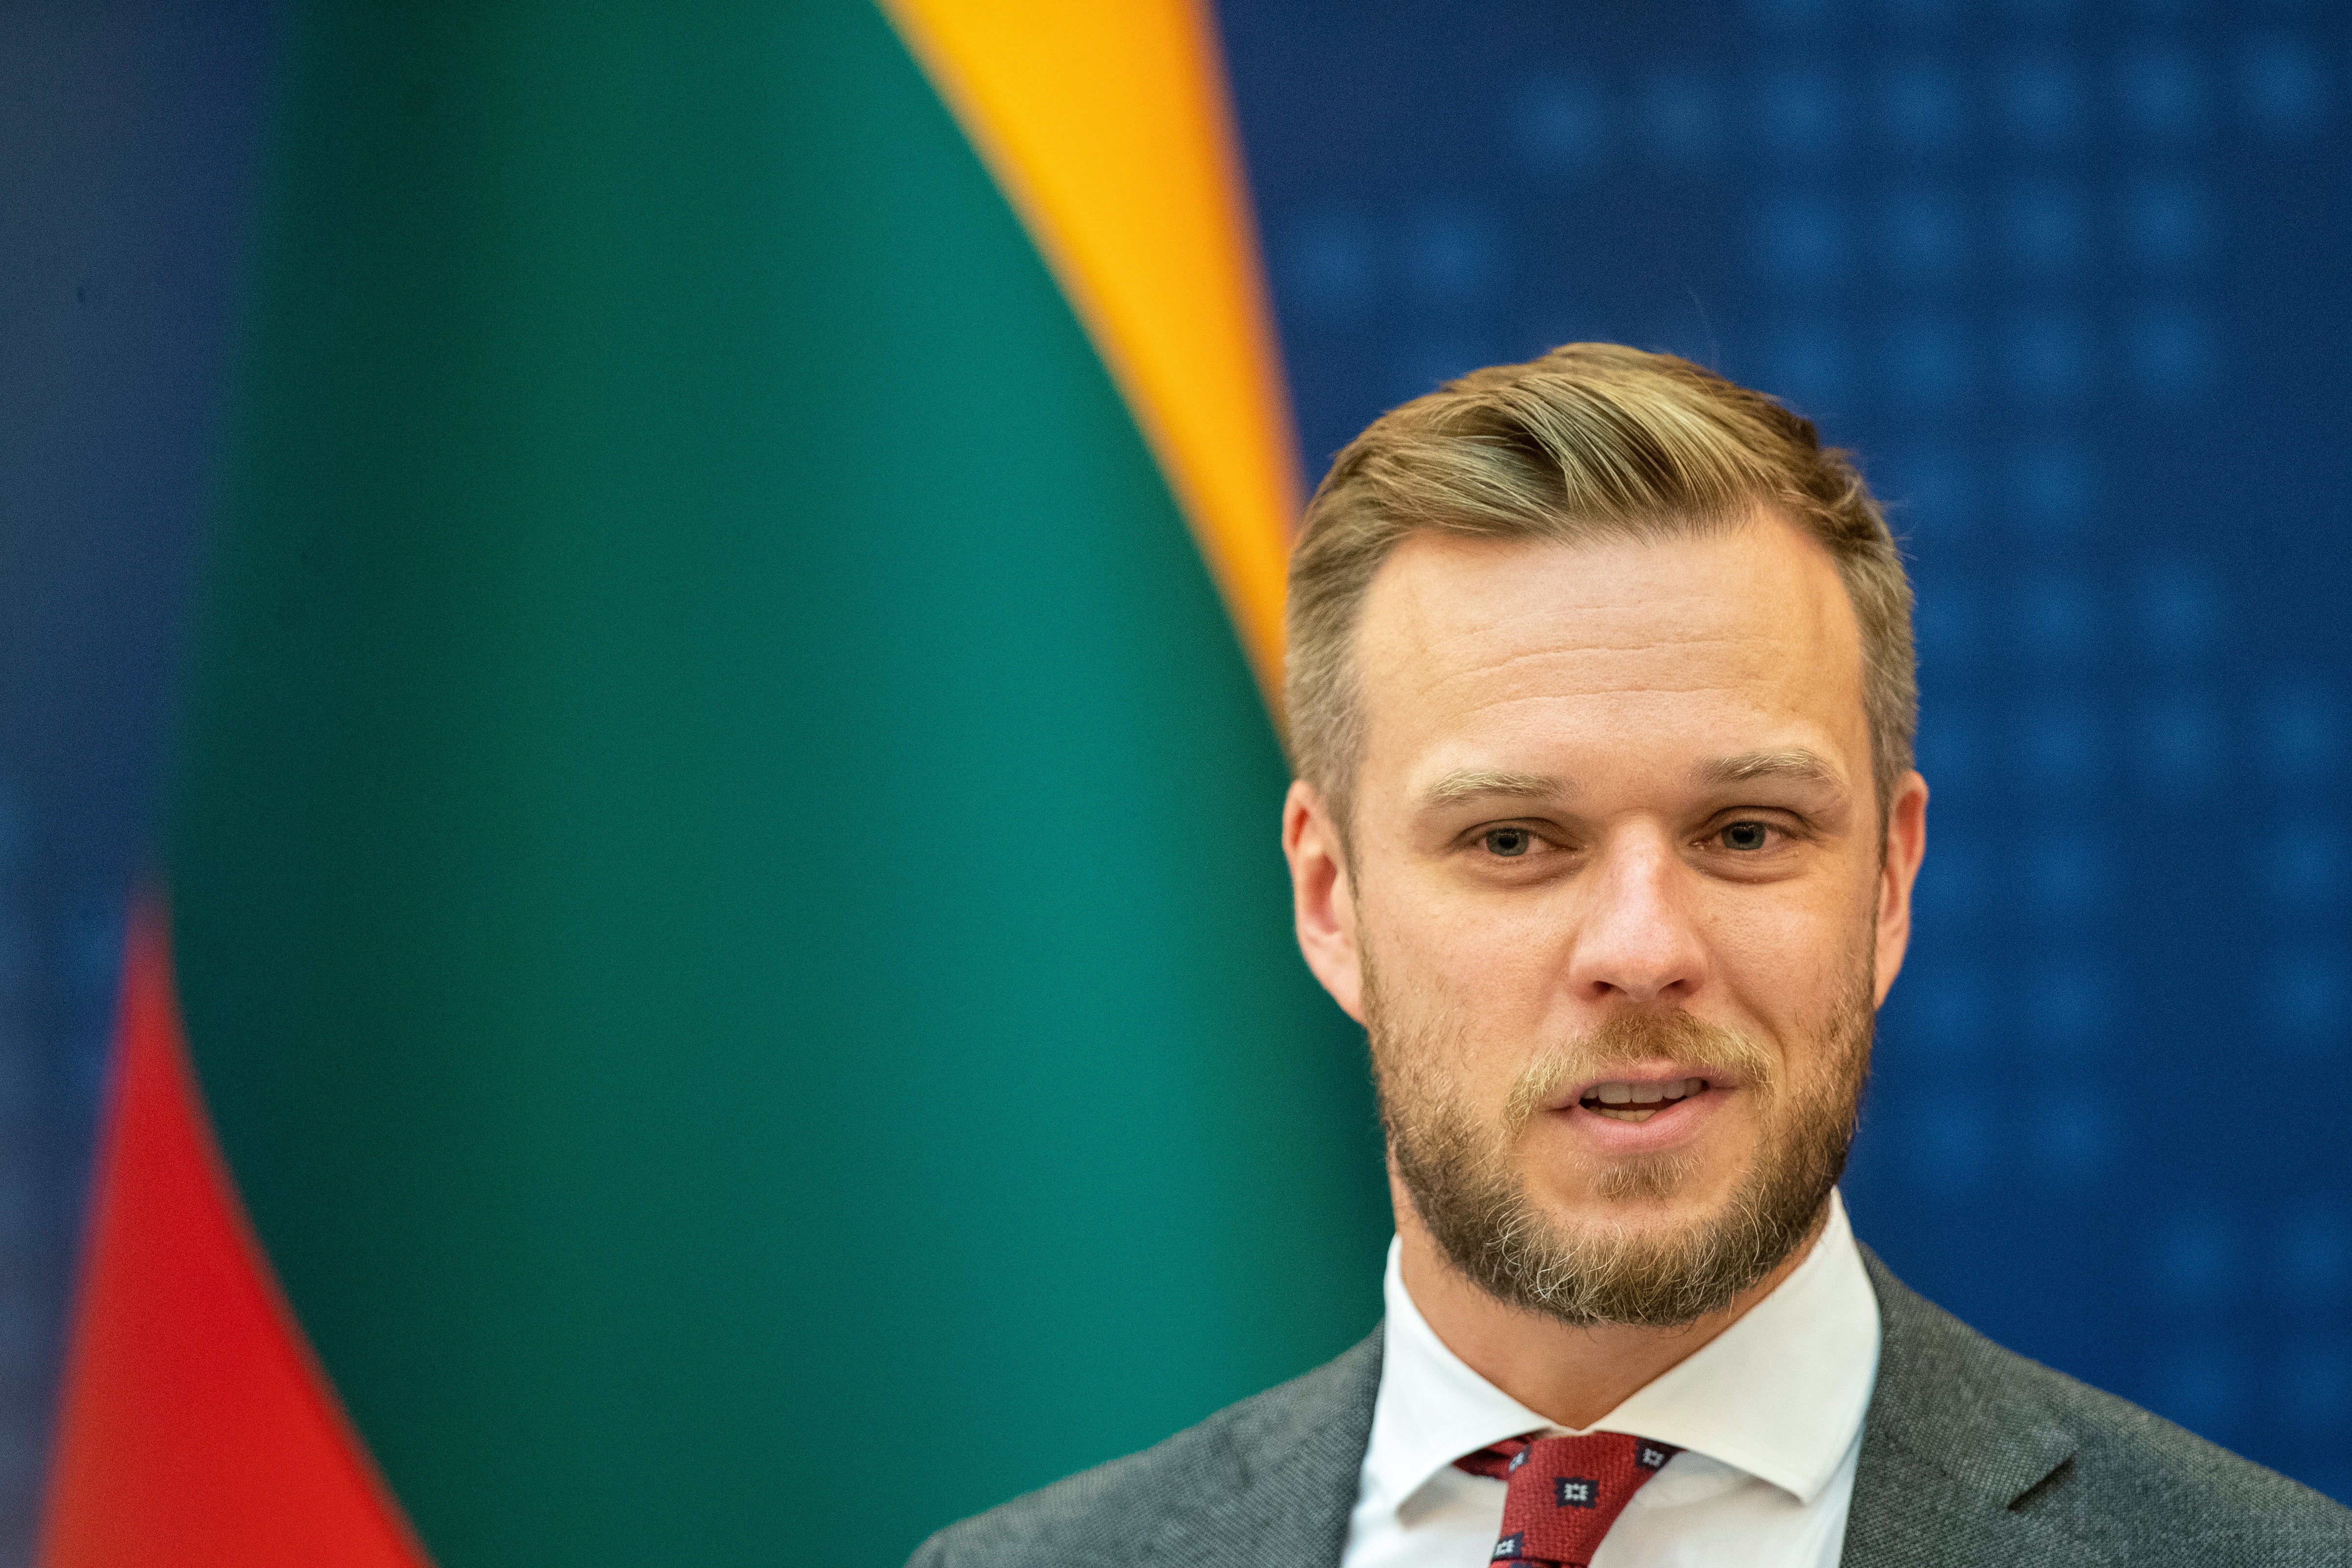 Lithuania’s foreign minister Gabrielius Landsbergis is leading a values-based foreign policy